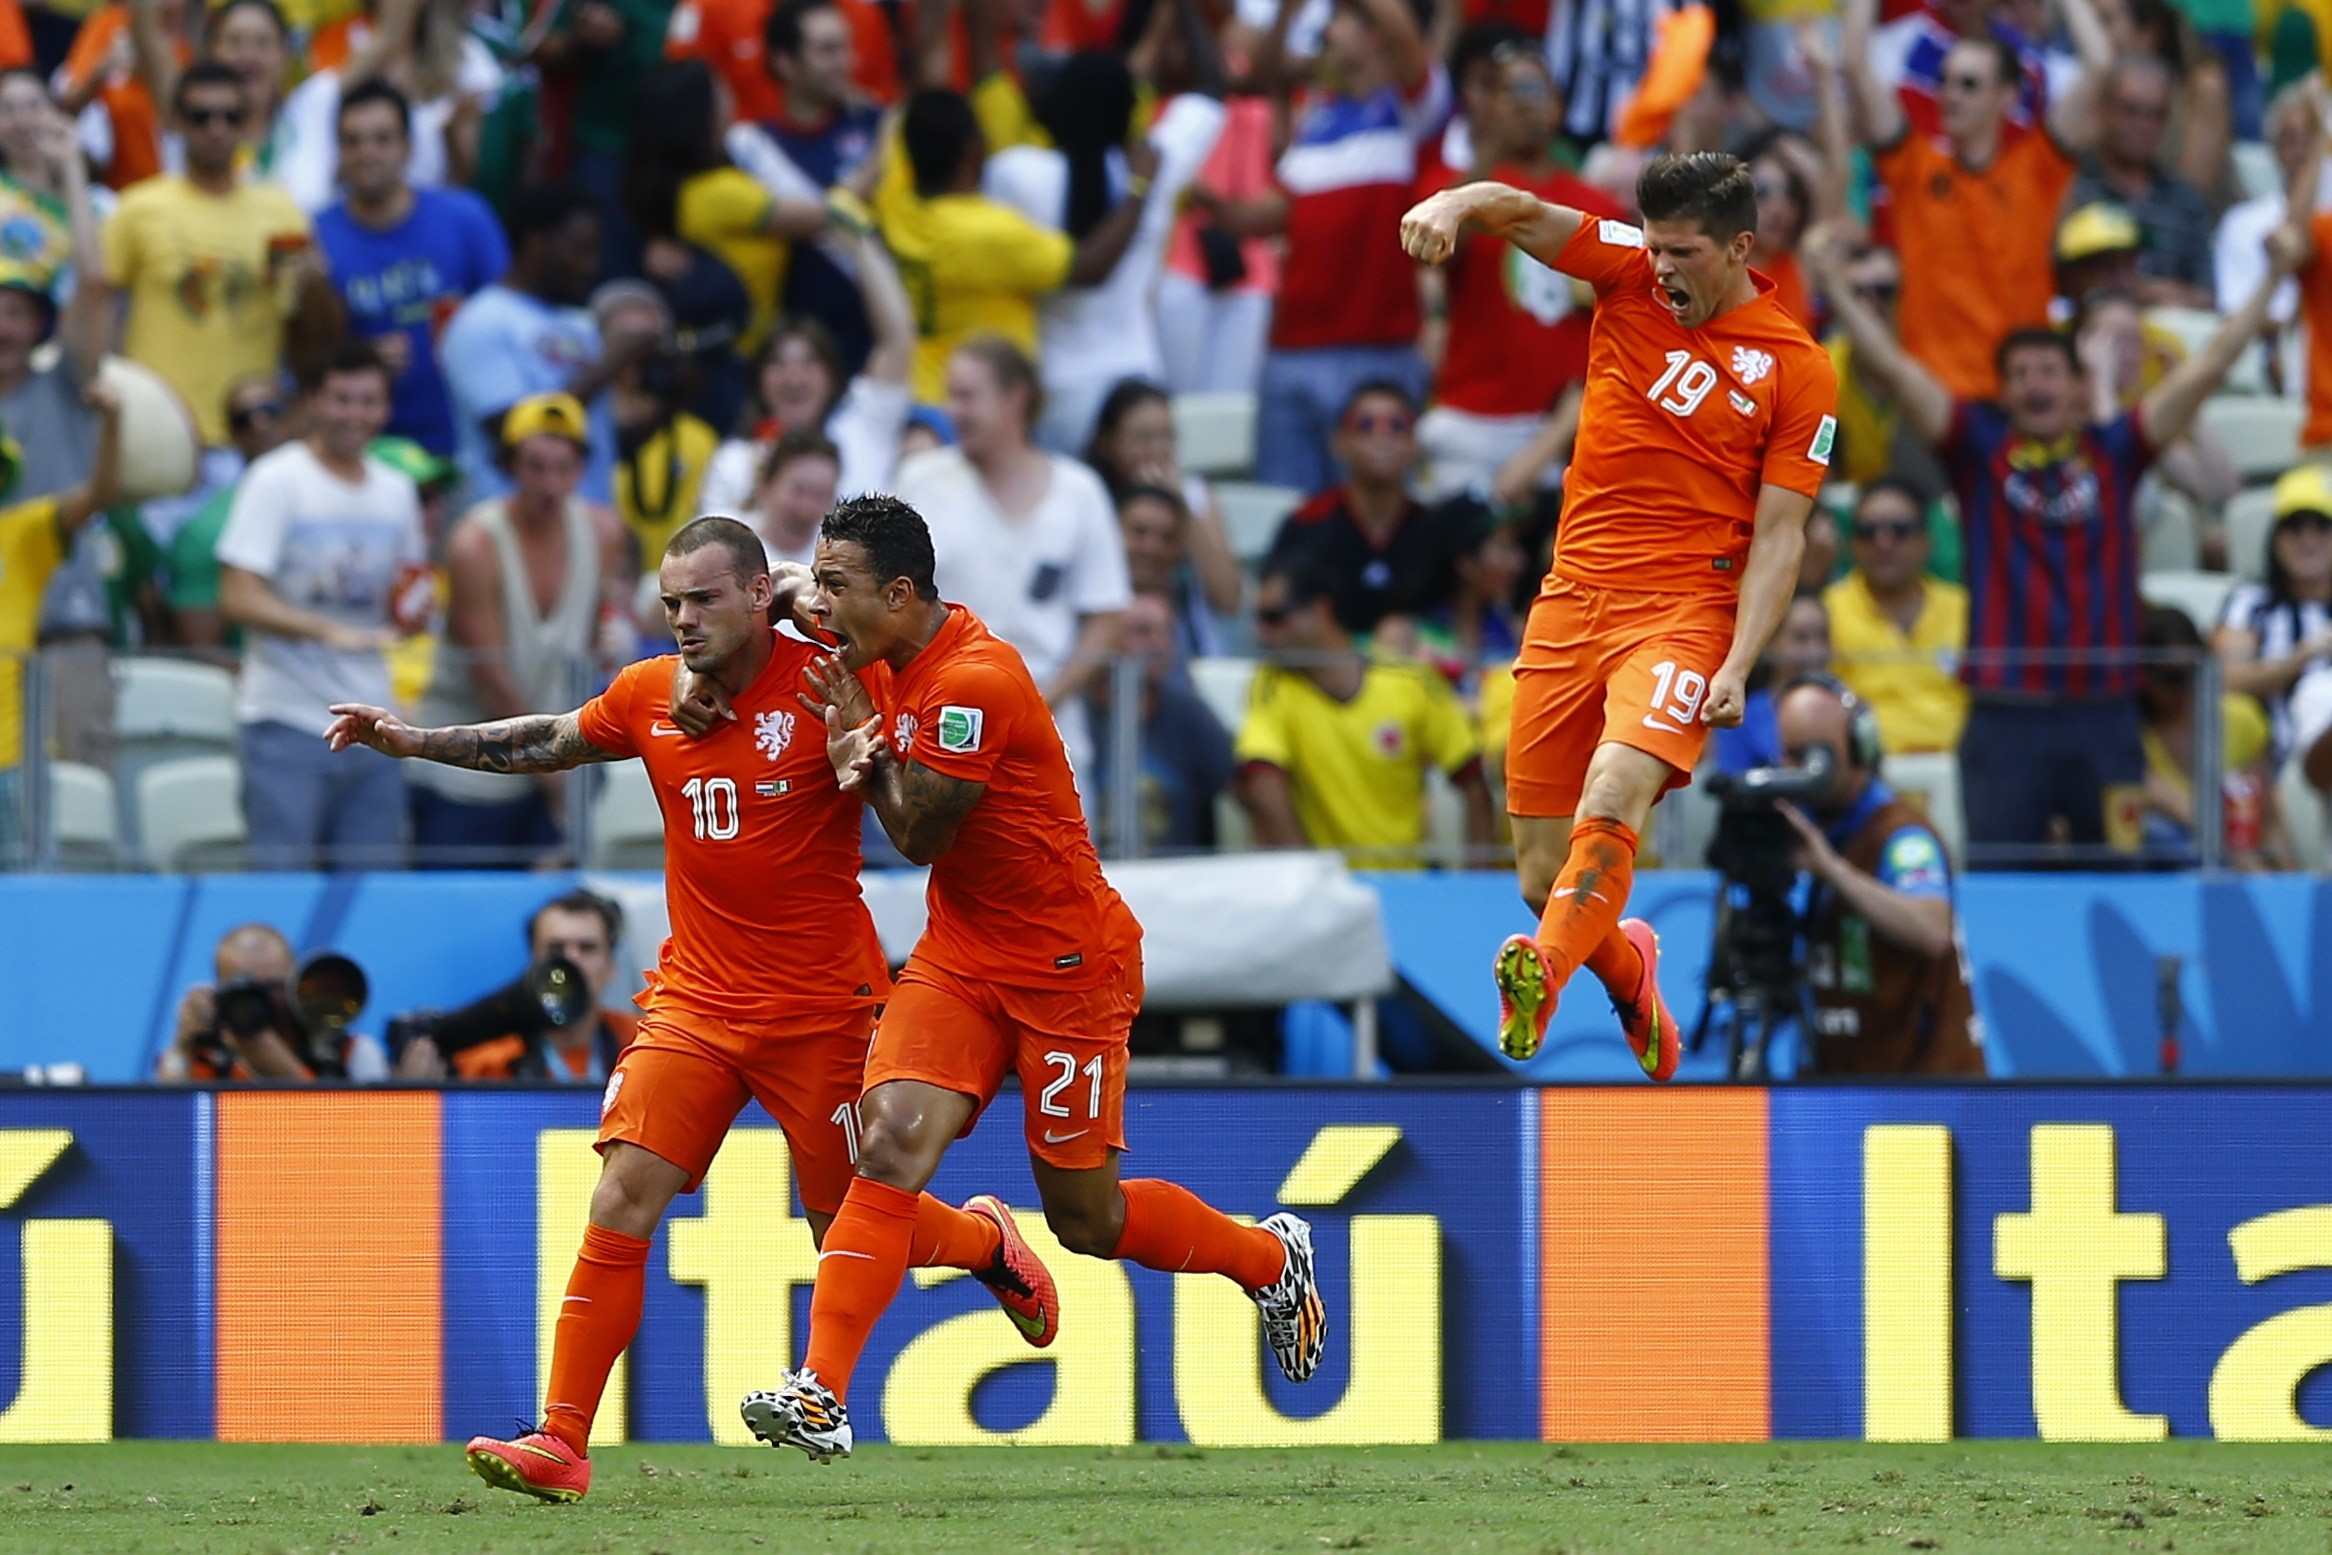 Netherlands Vs Mexico: 3 Moments That Changed The Game For The Oranje